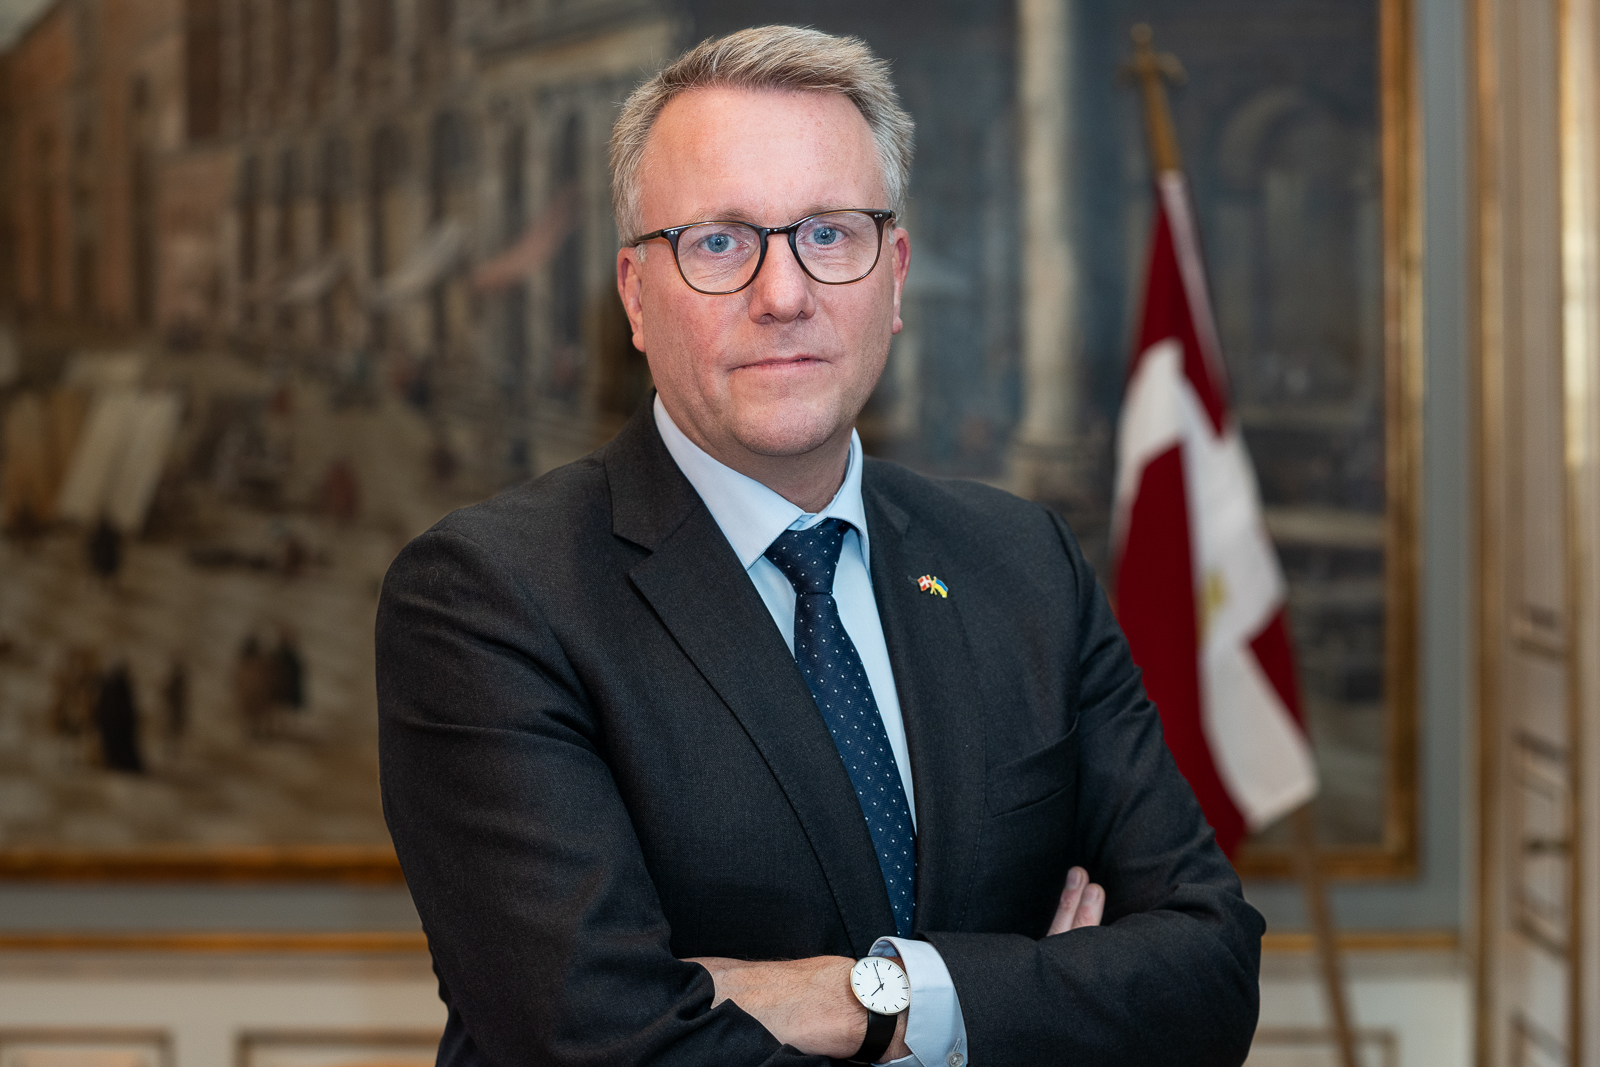 Danish government will invest billions and remove burdens for entrepreneurs